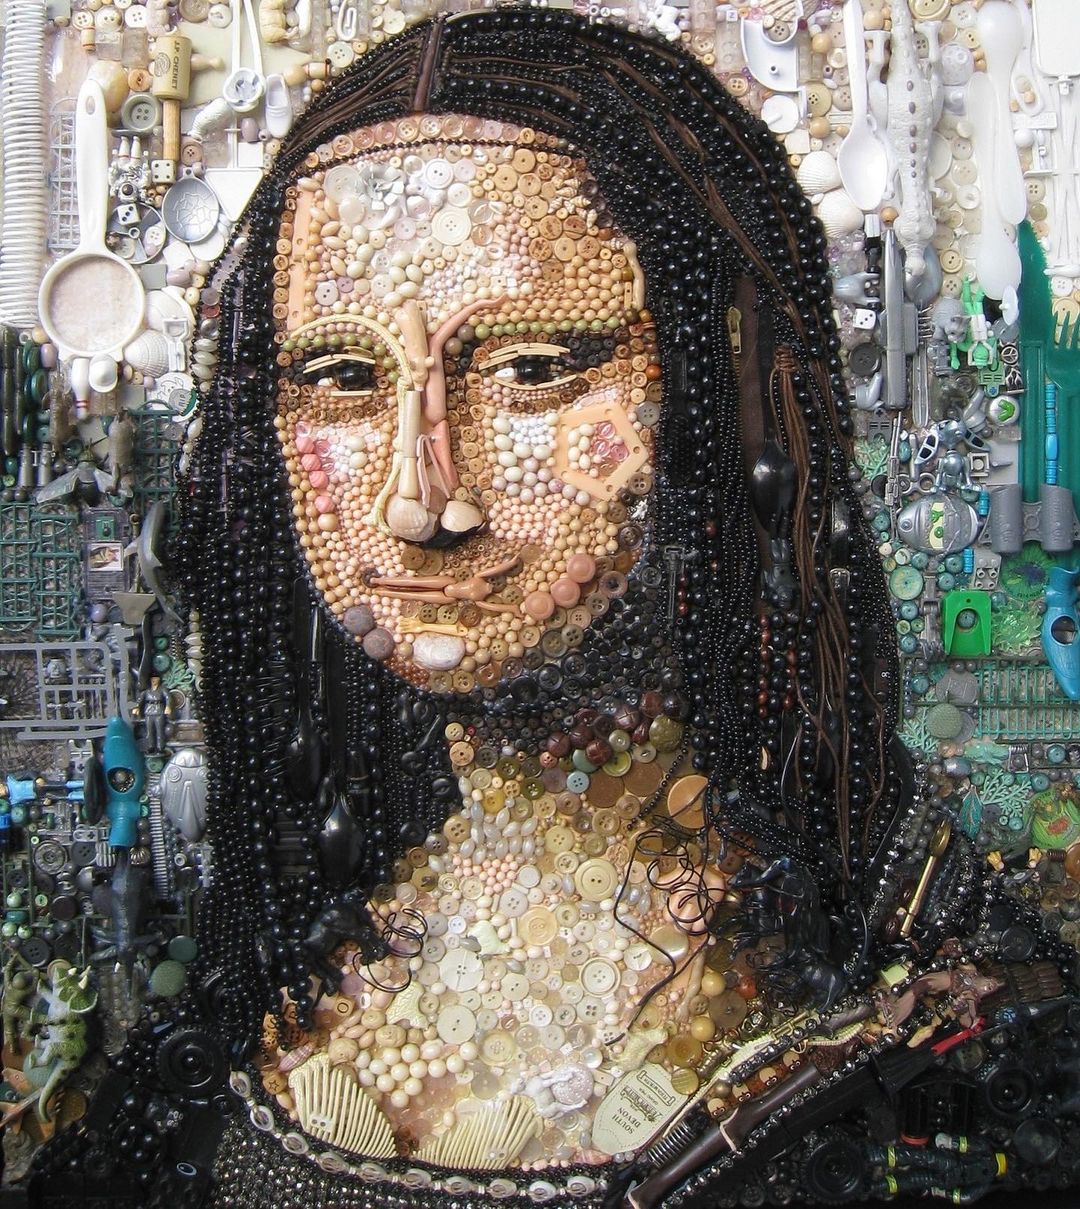 Stunning Assemblages Of Popular Portraits, Pictures, And Photos By Jane Perkins (14)